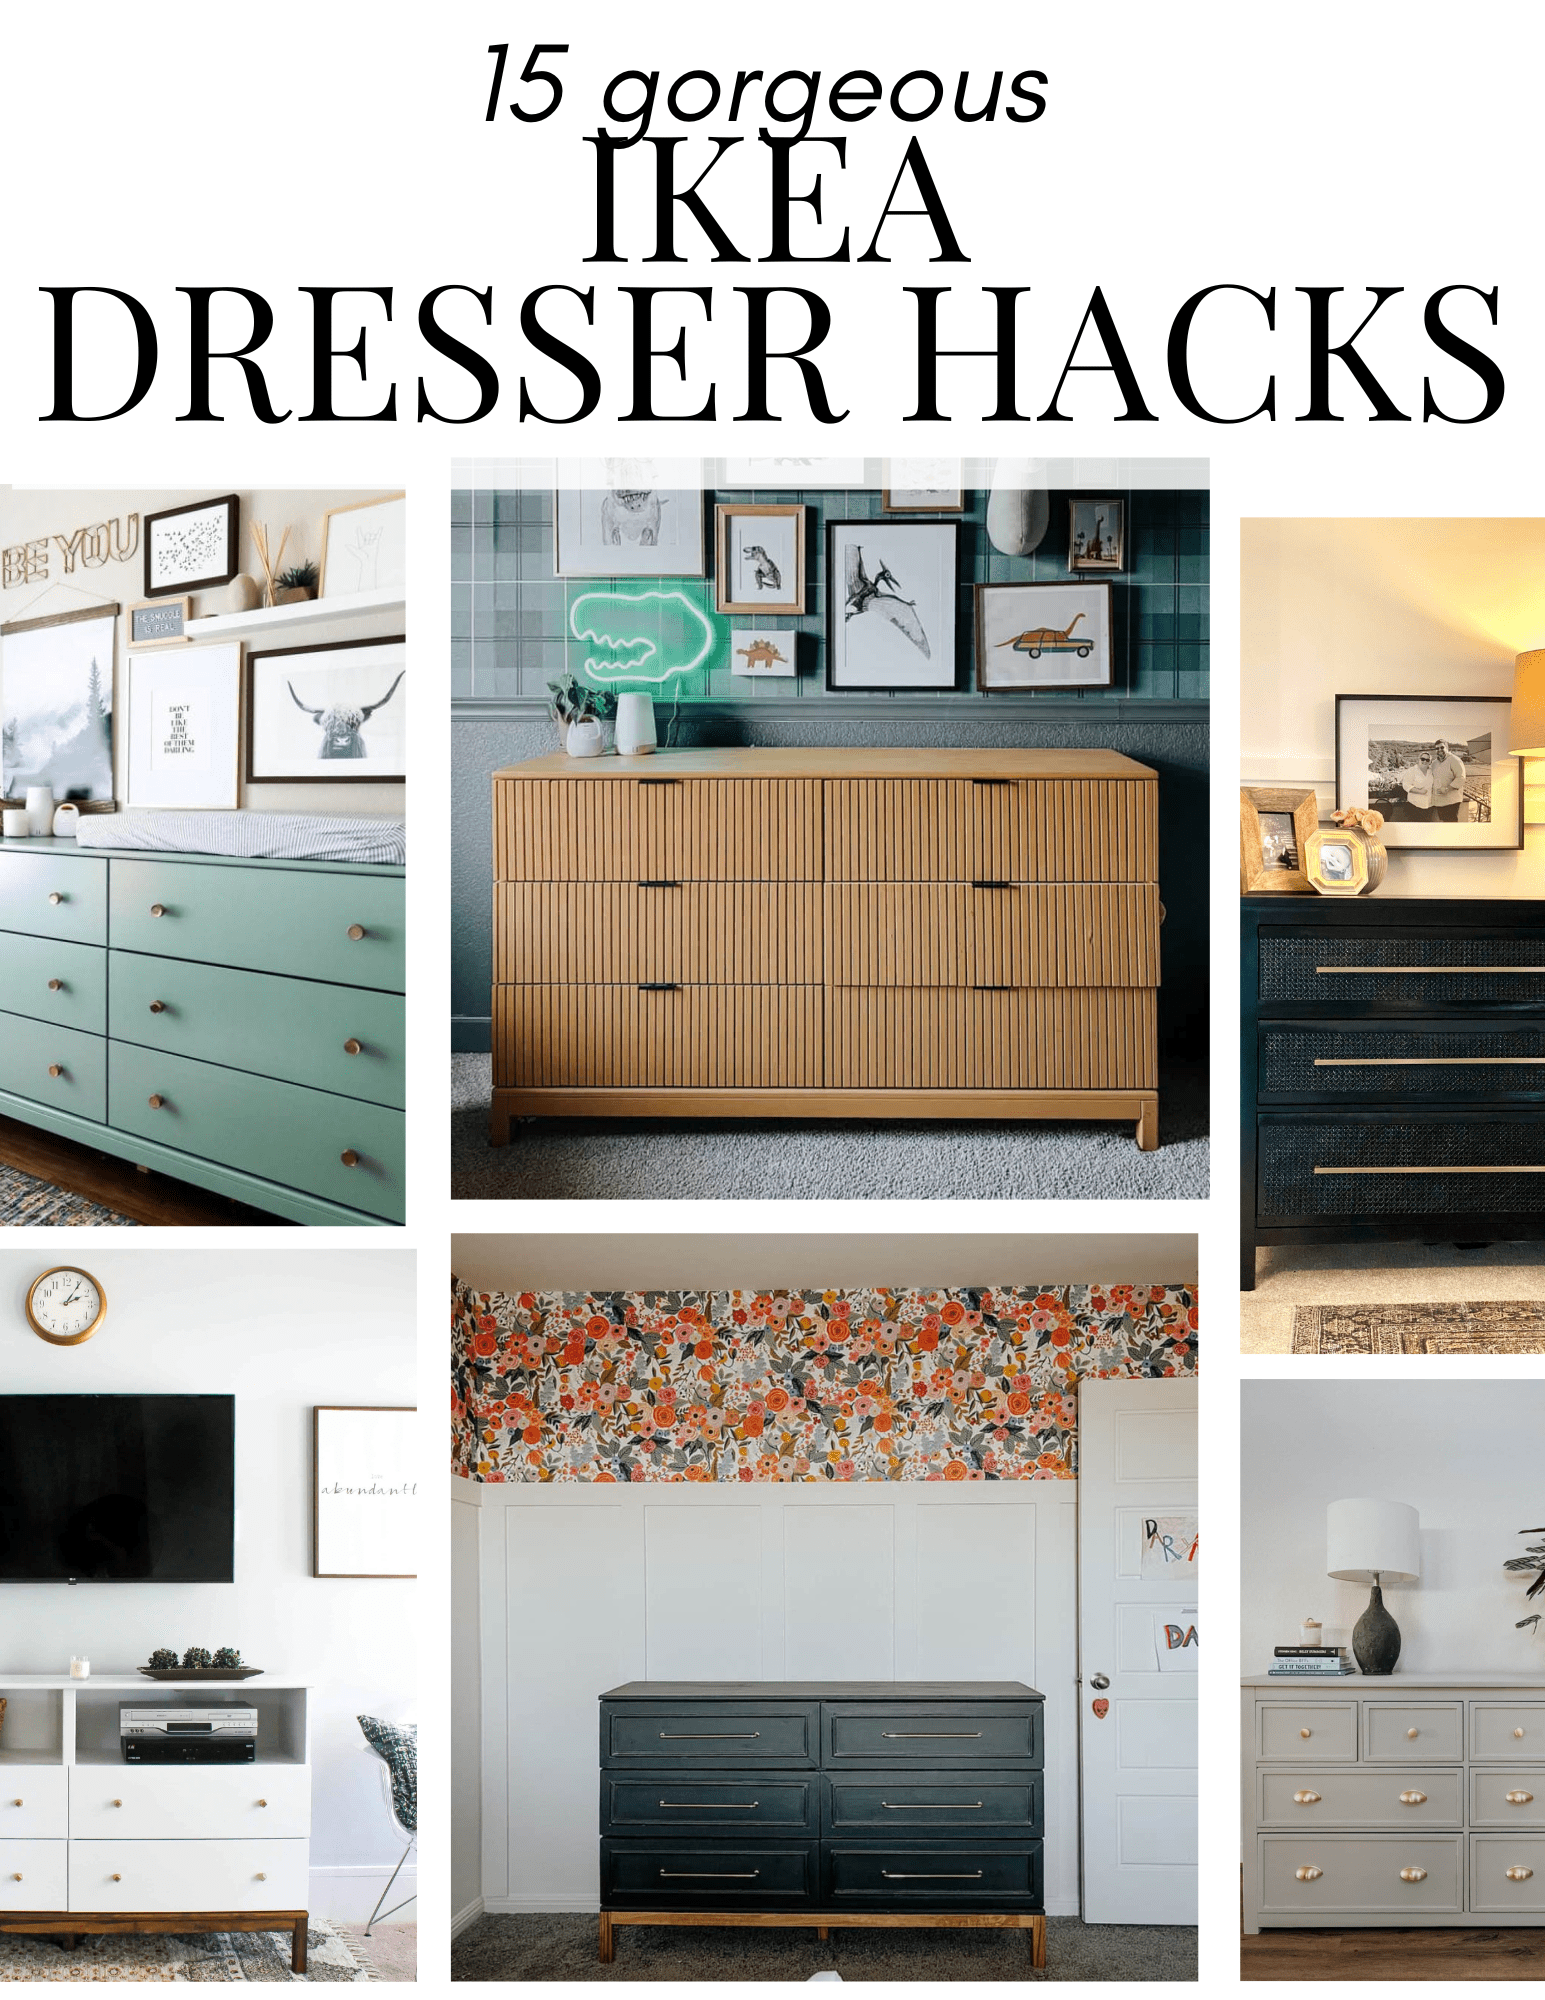 16 Clever IKEA Dresser Hacks You Need to Try